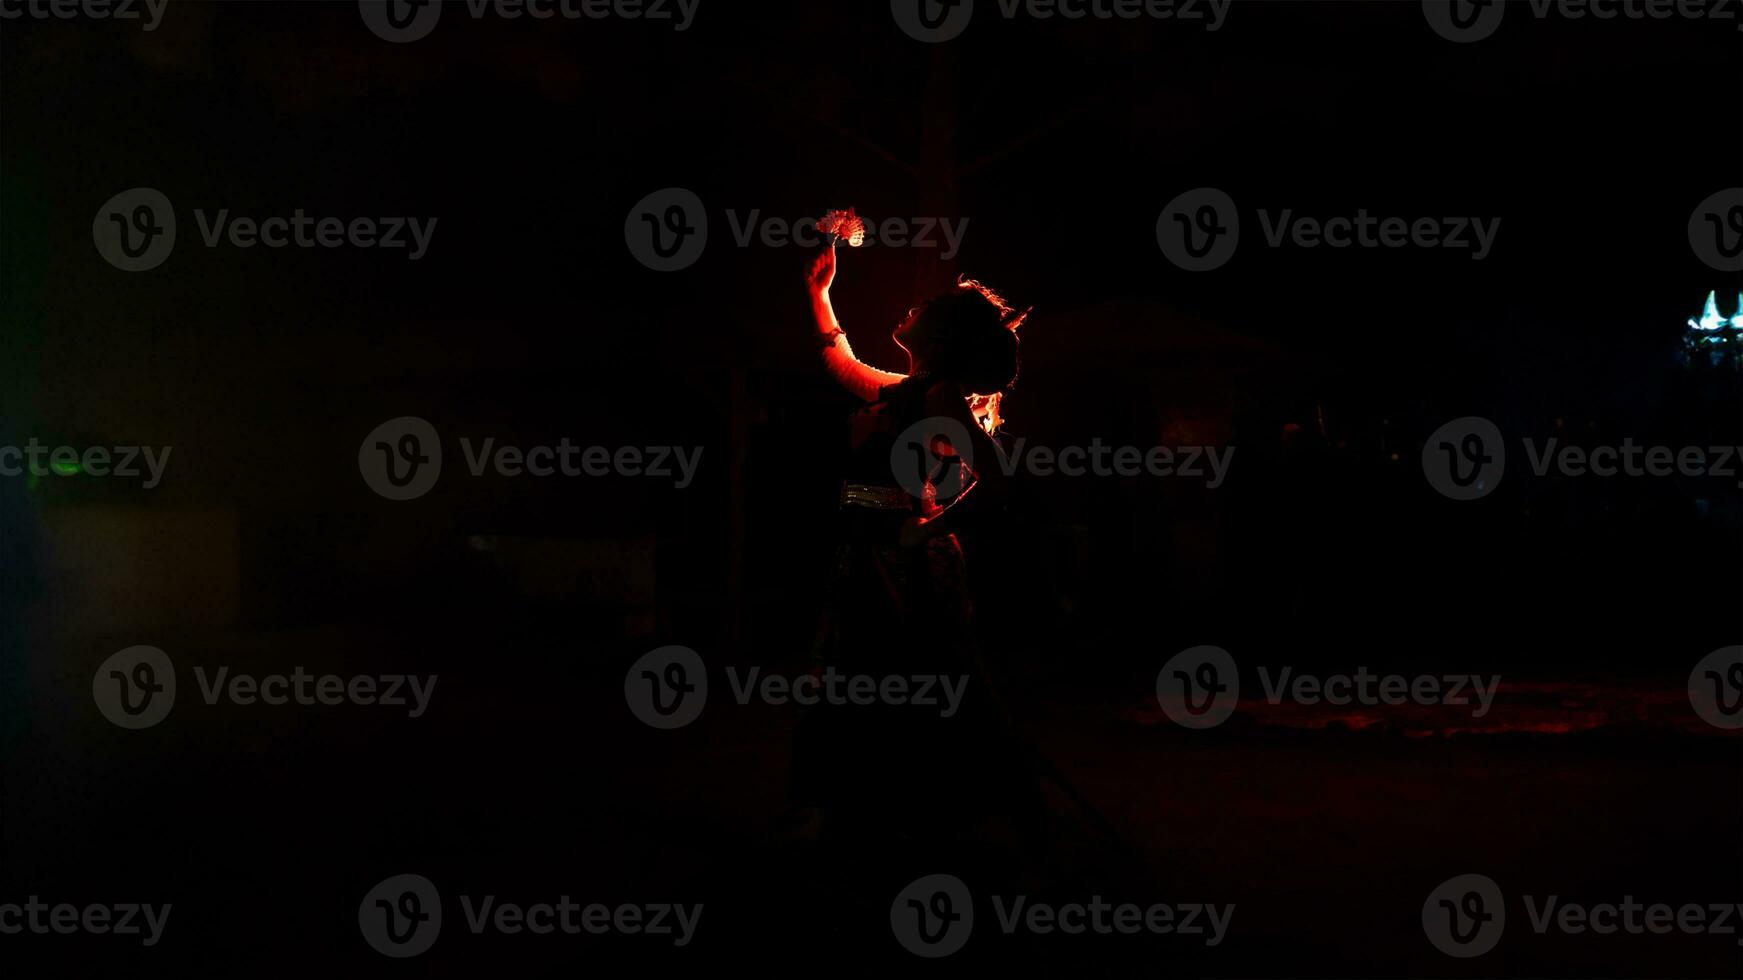 the silhouette of a female dancer holding jewelry that looks like a reflection reflecting in the dim light photo